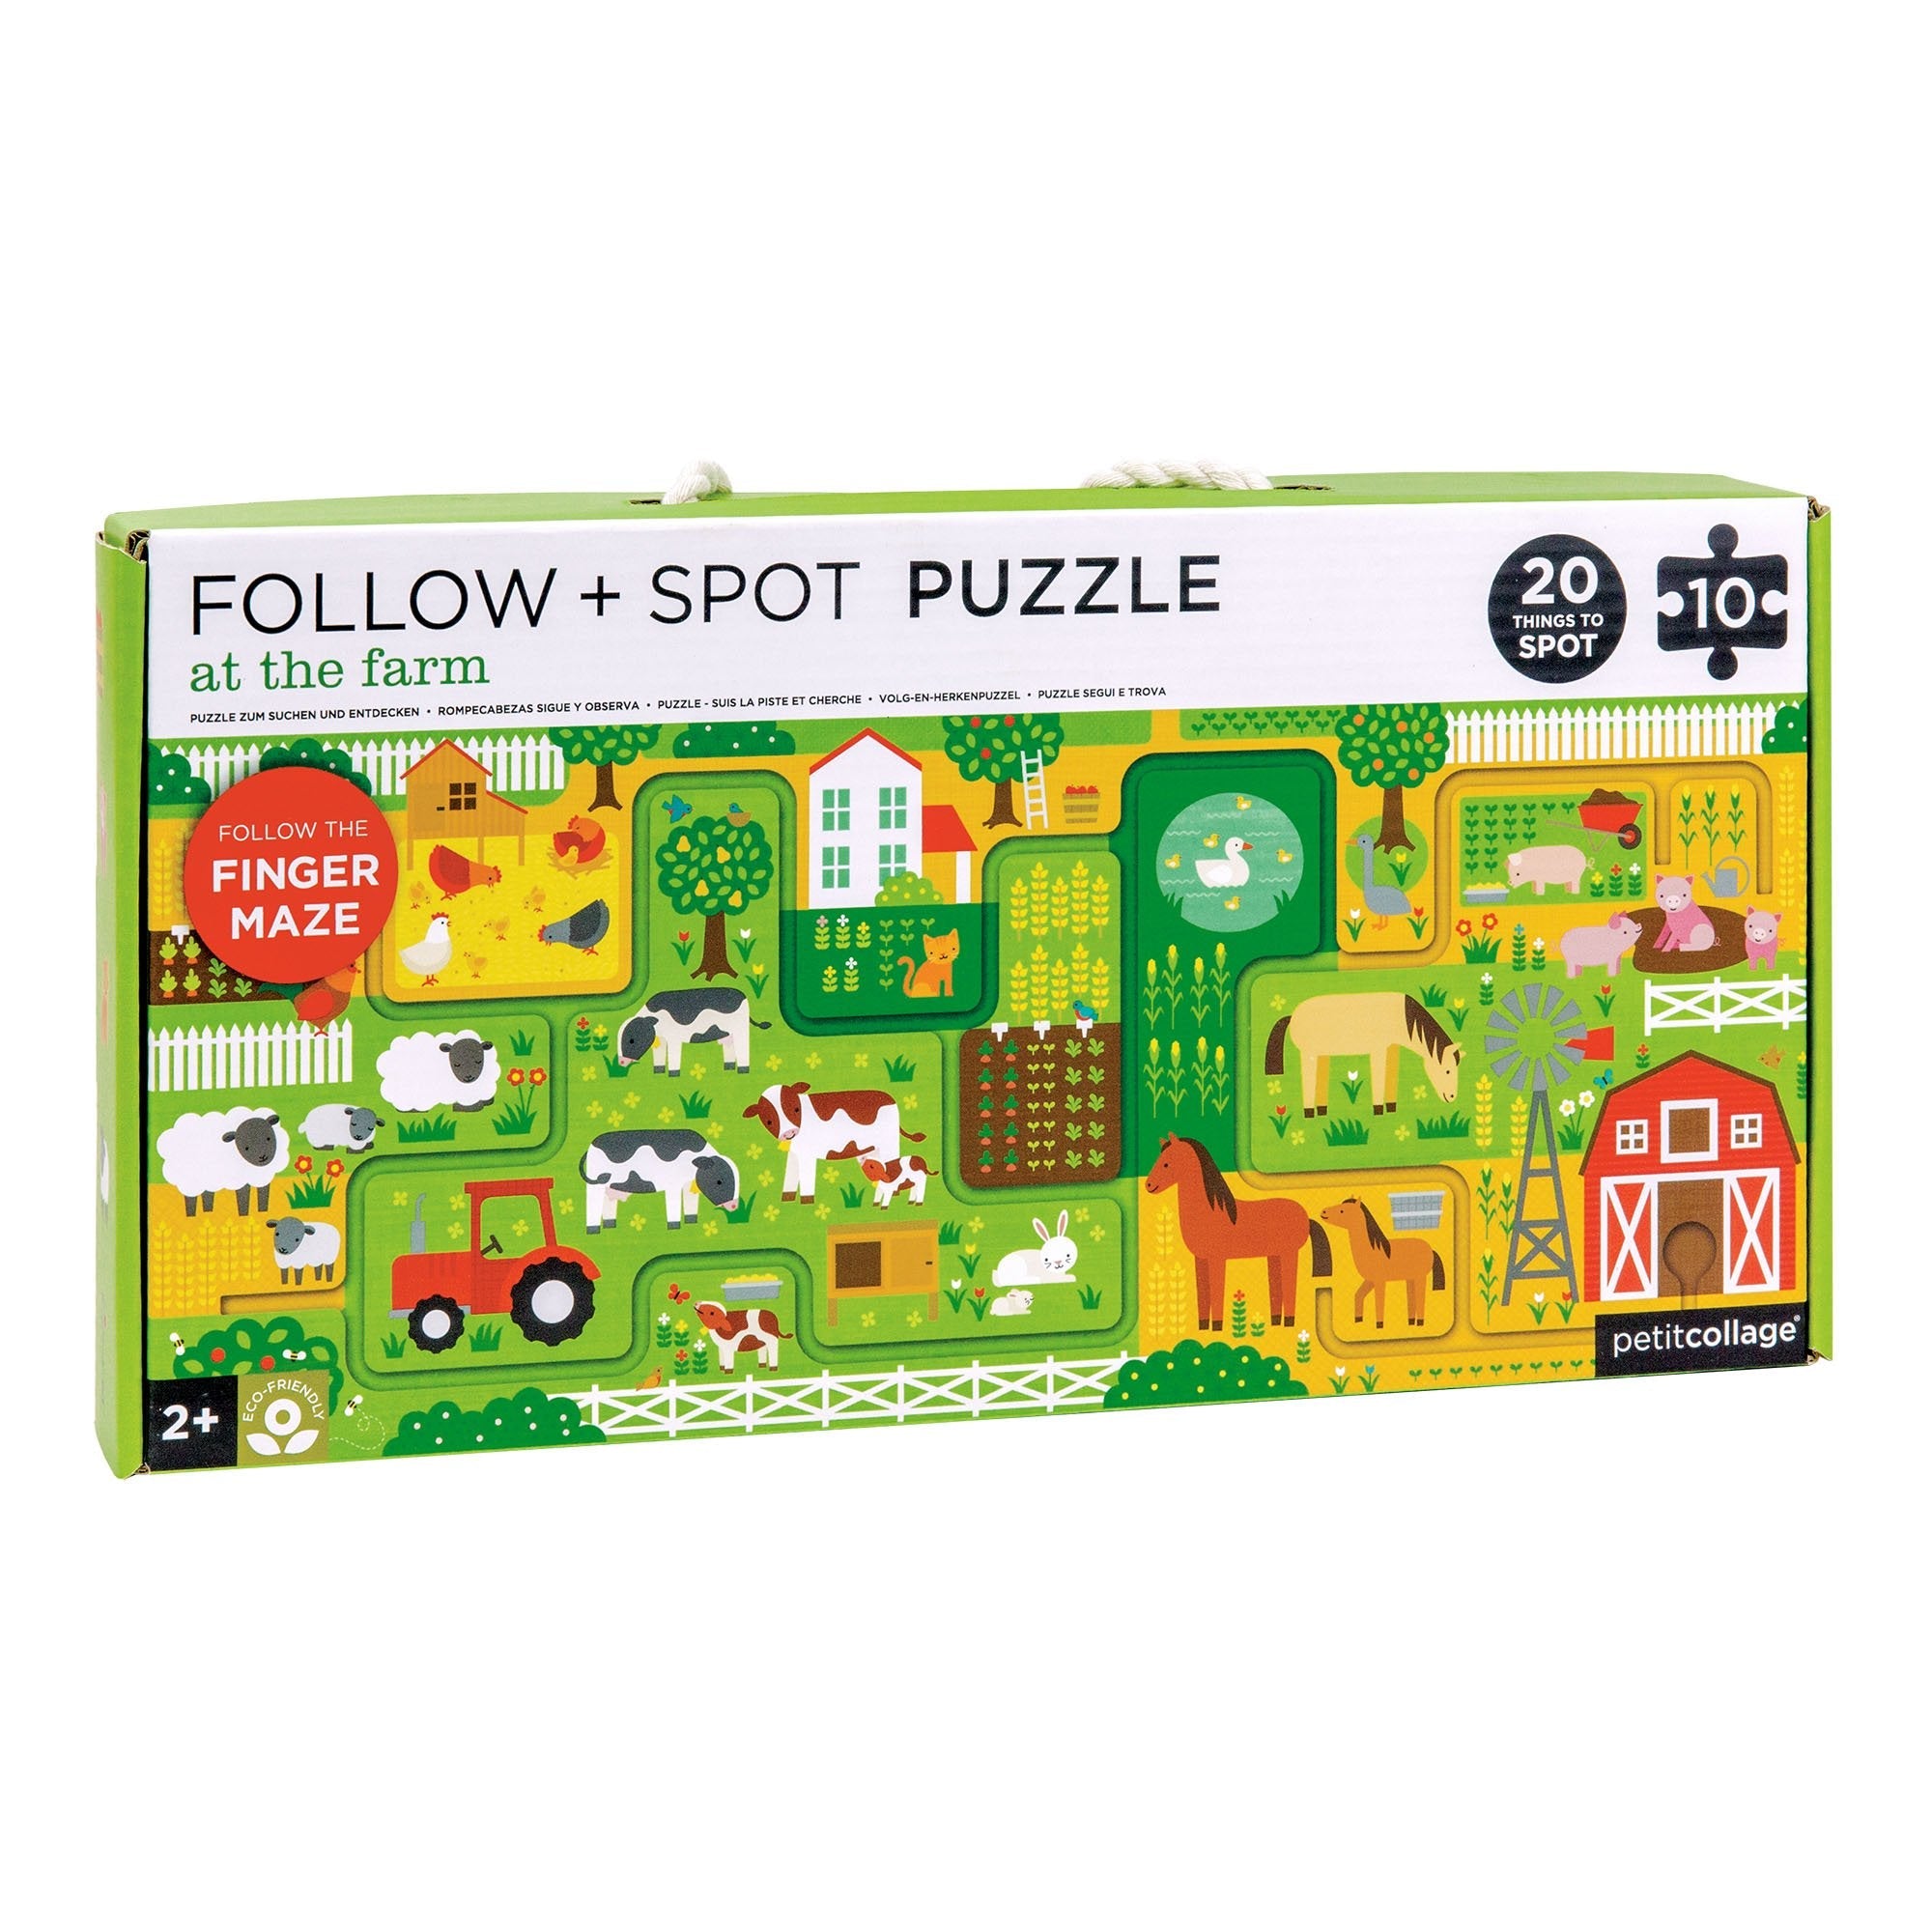 At the Farm Puzzle